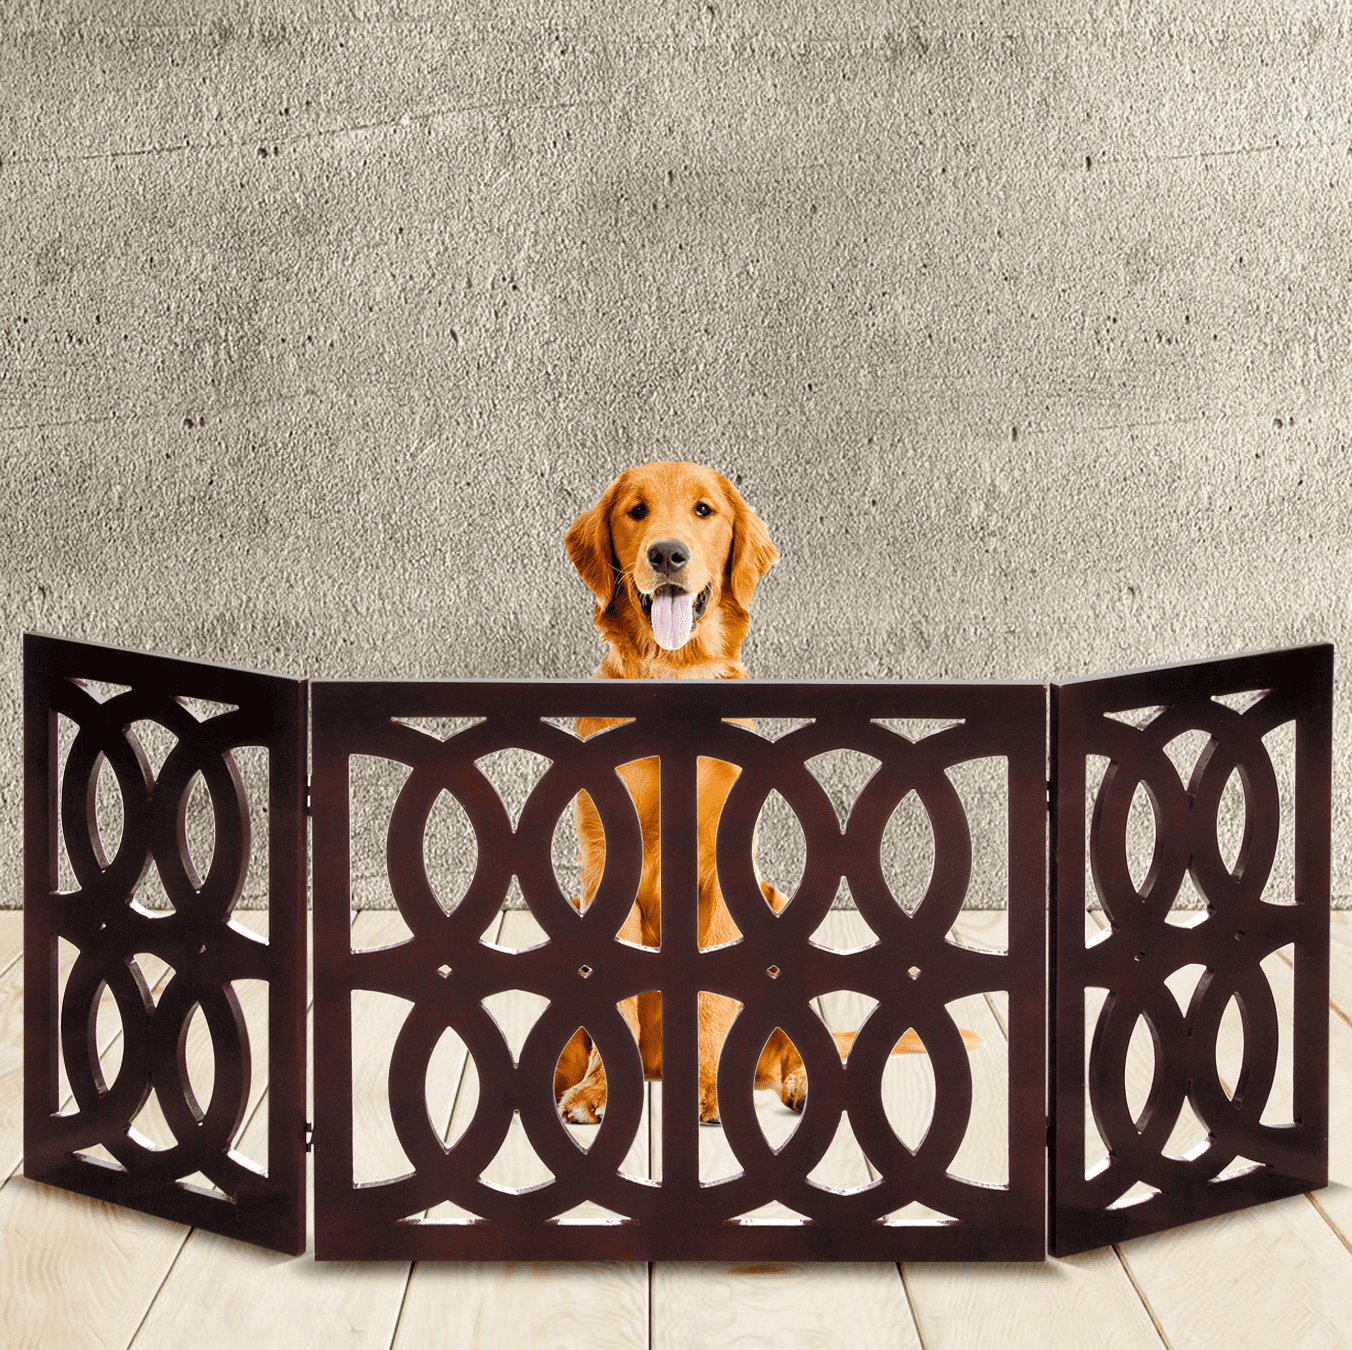 Doorways Barrier for Stairs Bundaloo Freestanding Dog Gate Expandable Decorative Wooden Fence for Small to Medium Pet Dogs & Hallways 